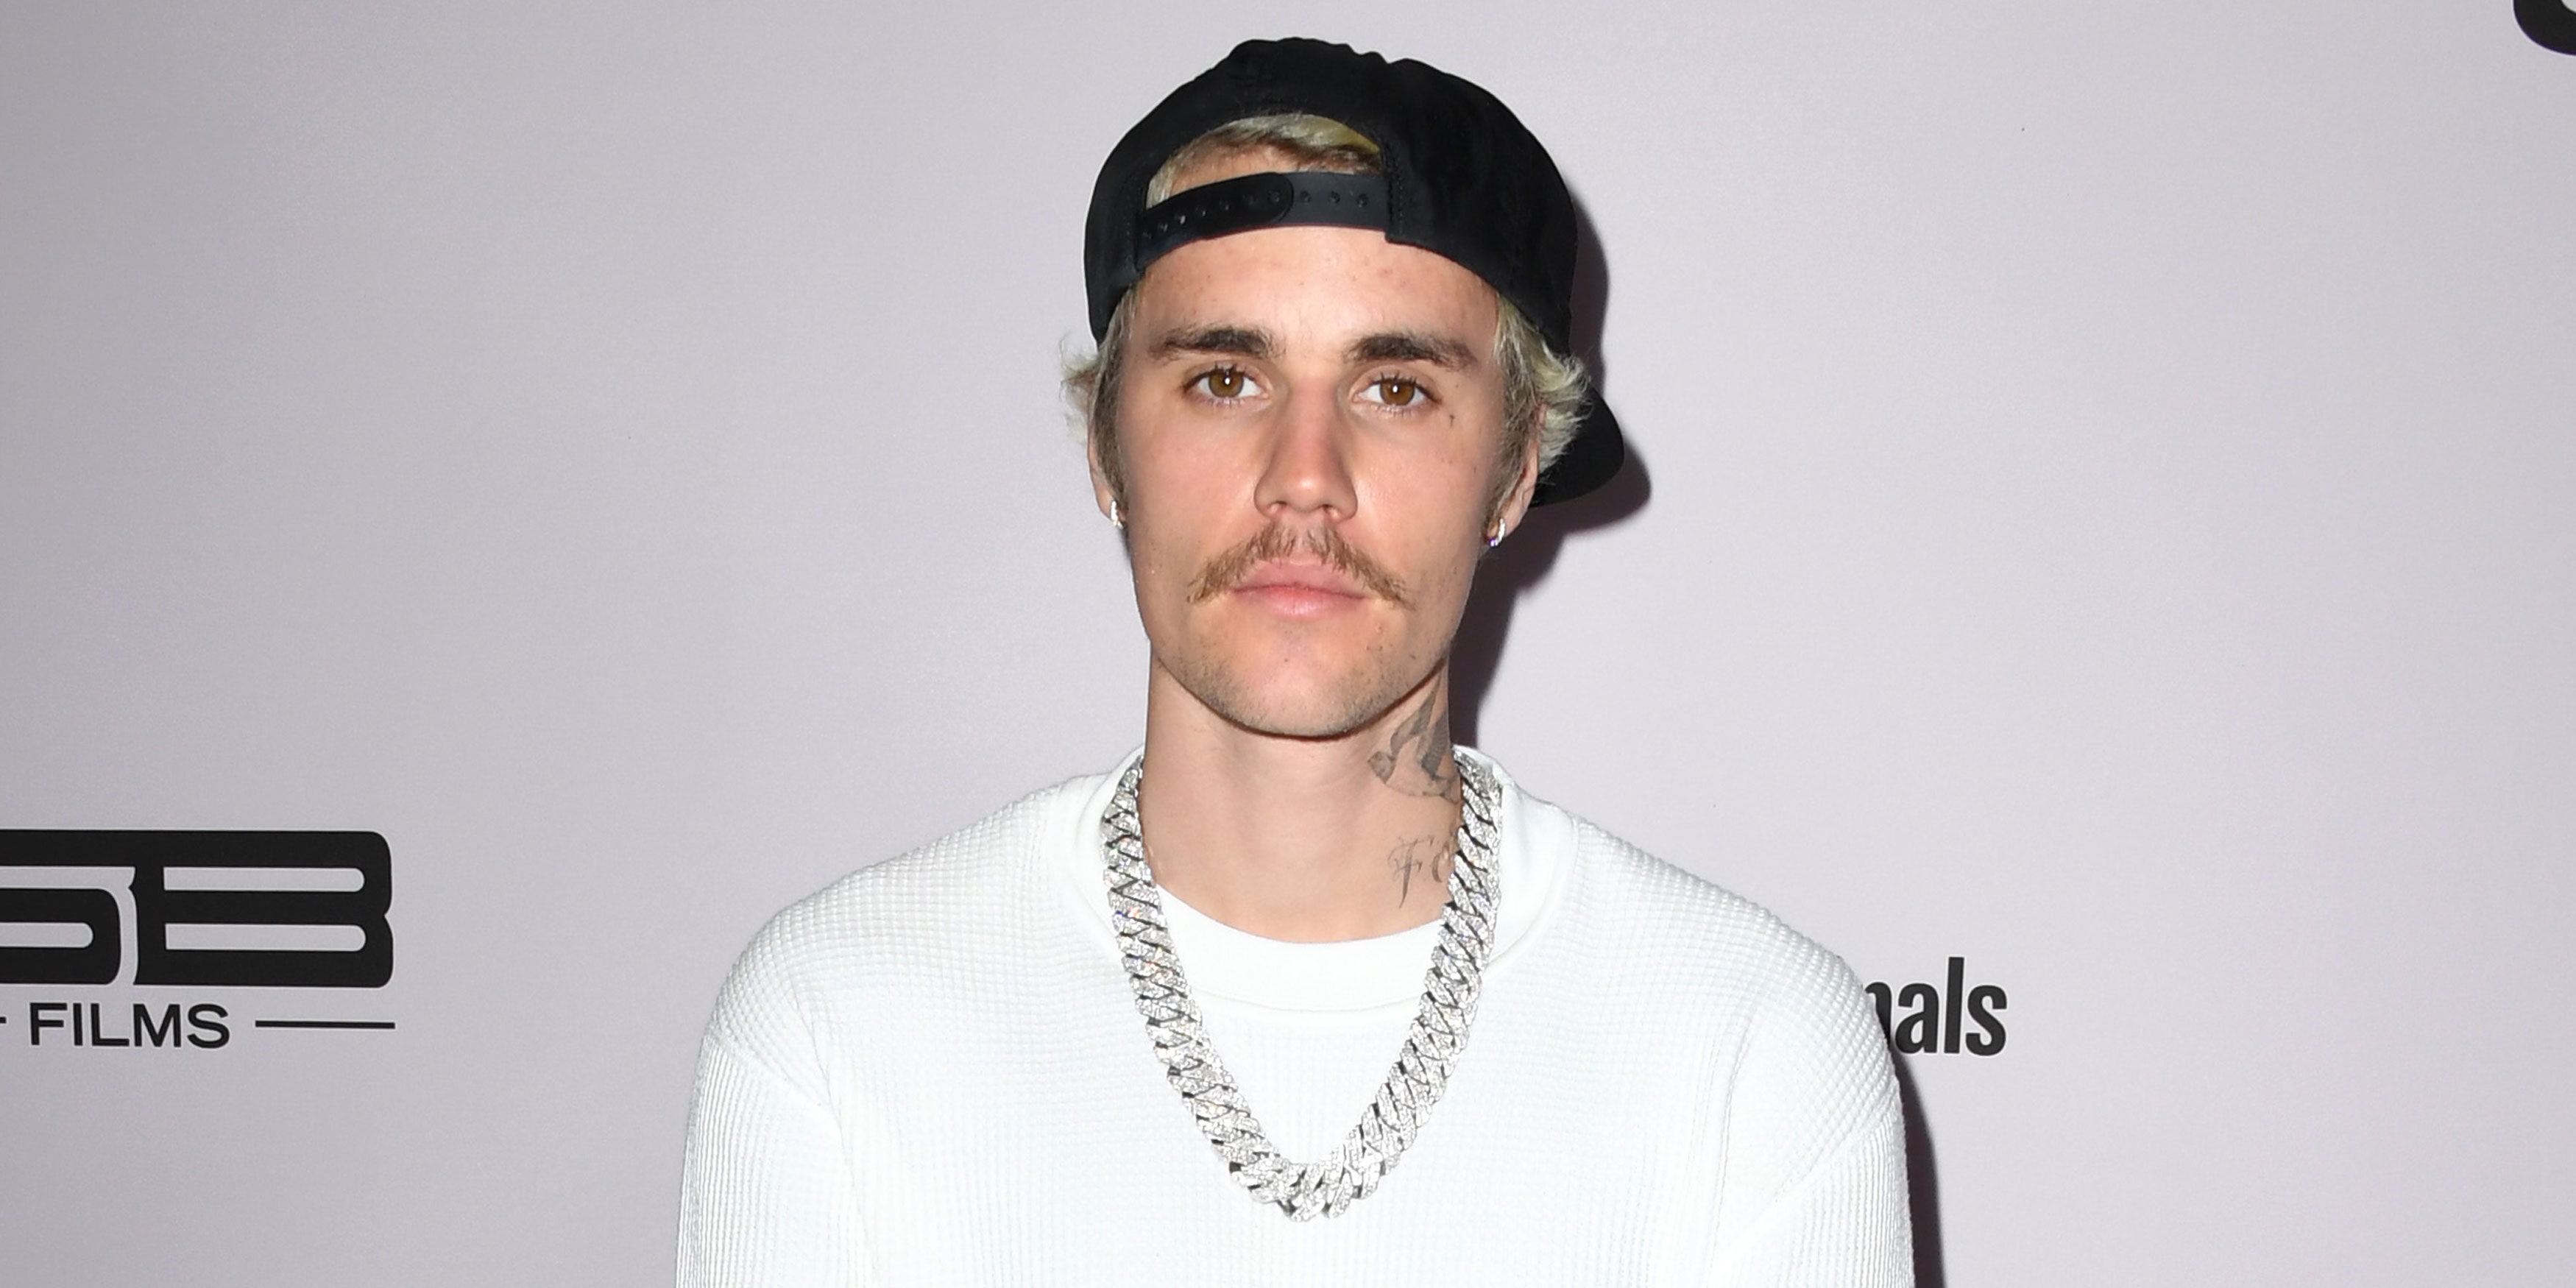 Justin Bieber Debuted New Hairstyle in Drake's Popstar Music Video